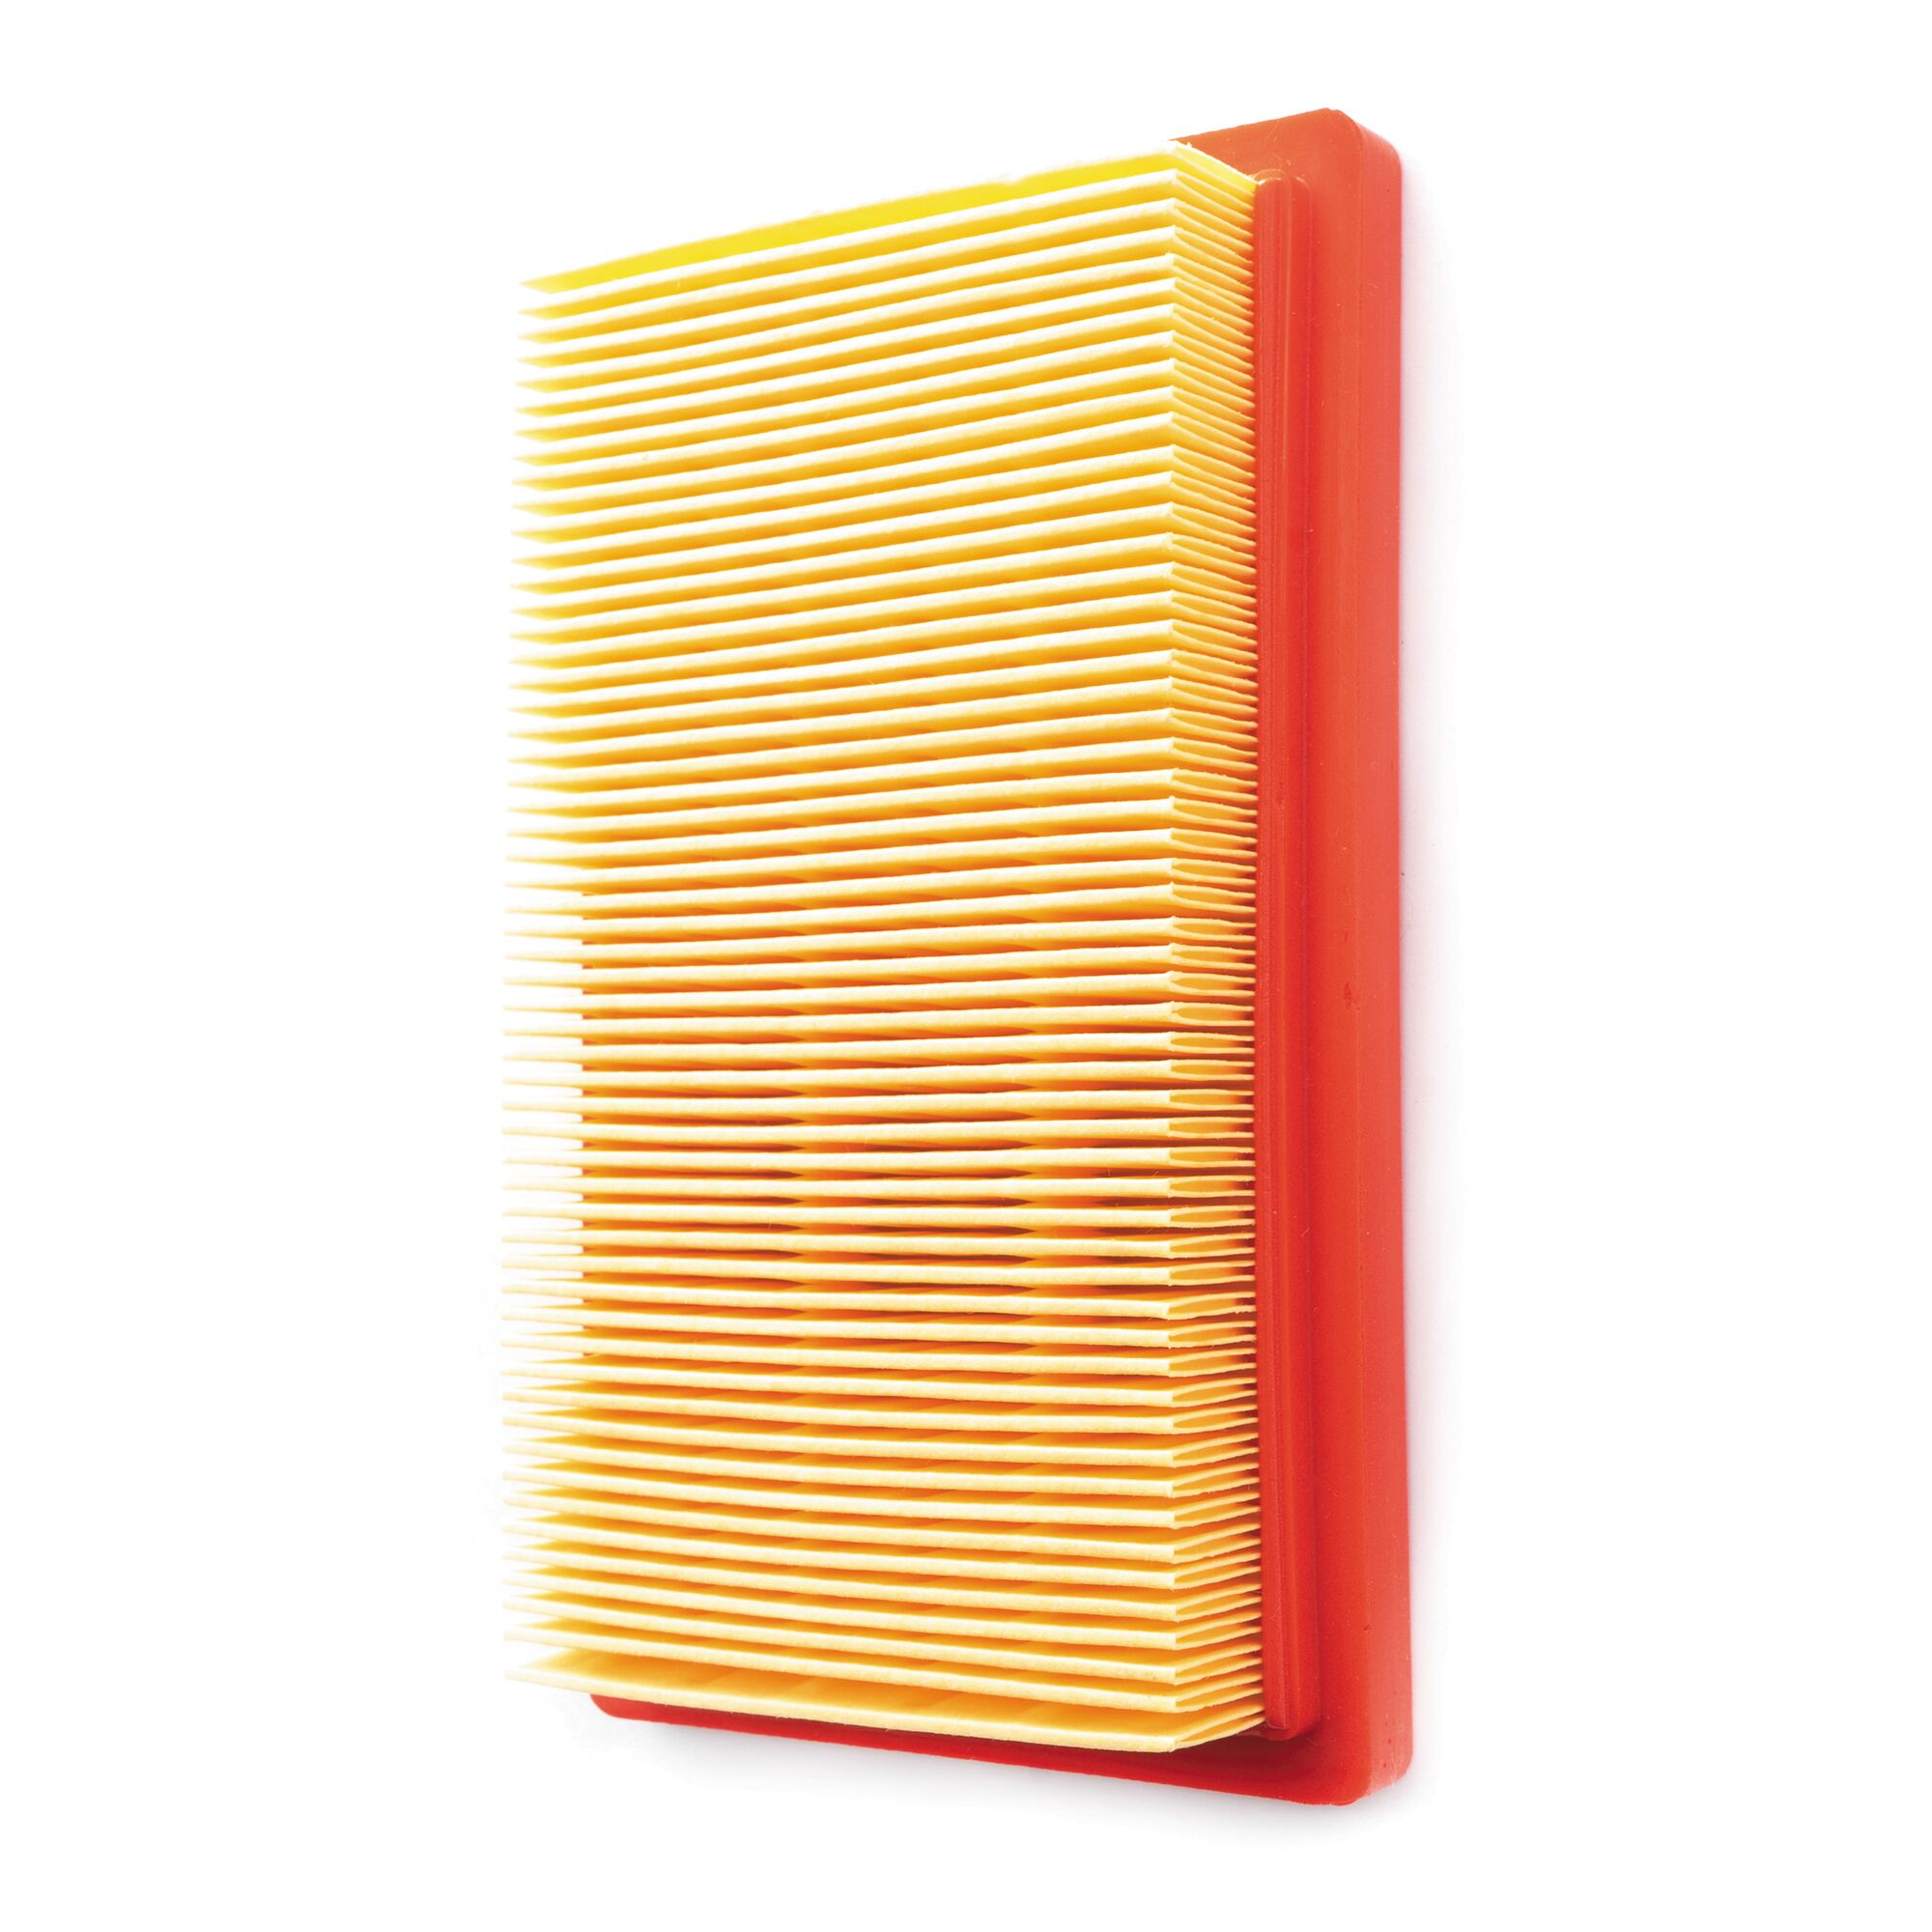 Left profile of air filter.